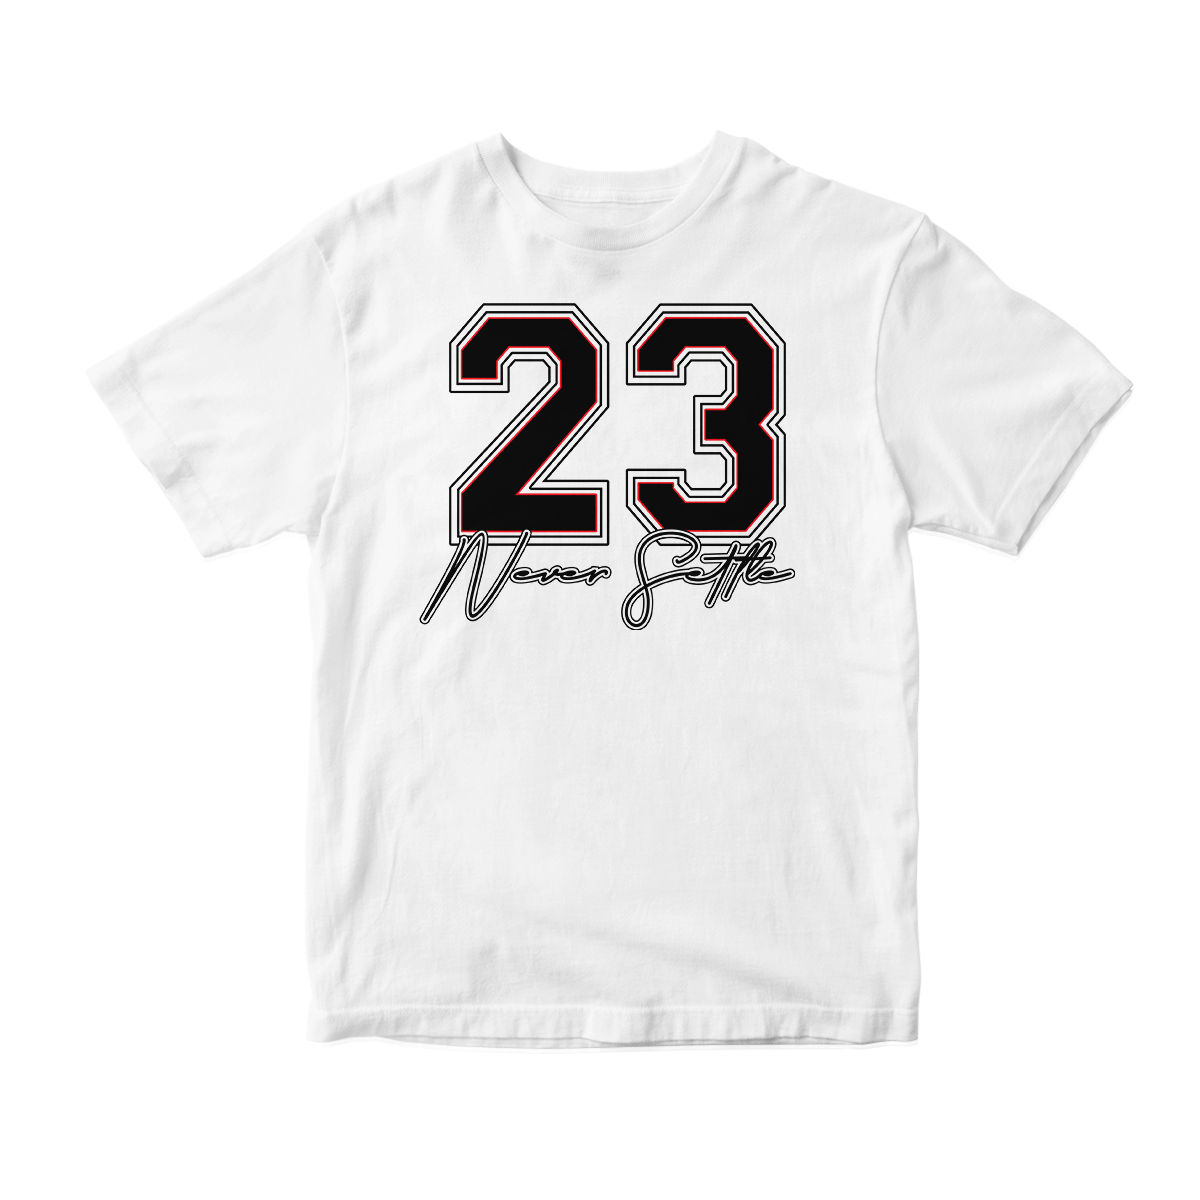 'Never Settle' in Reverse He Got Game CW Short Sleeve Tee